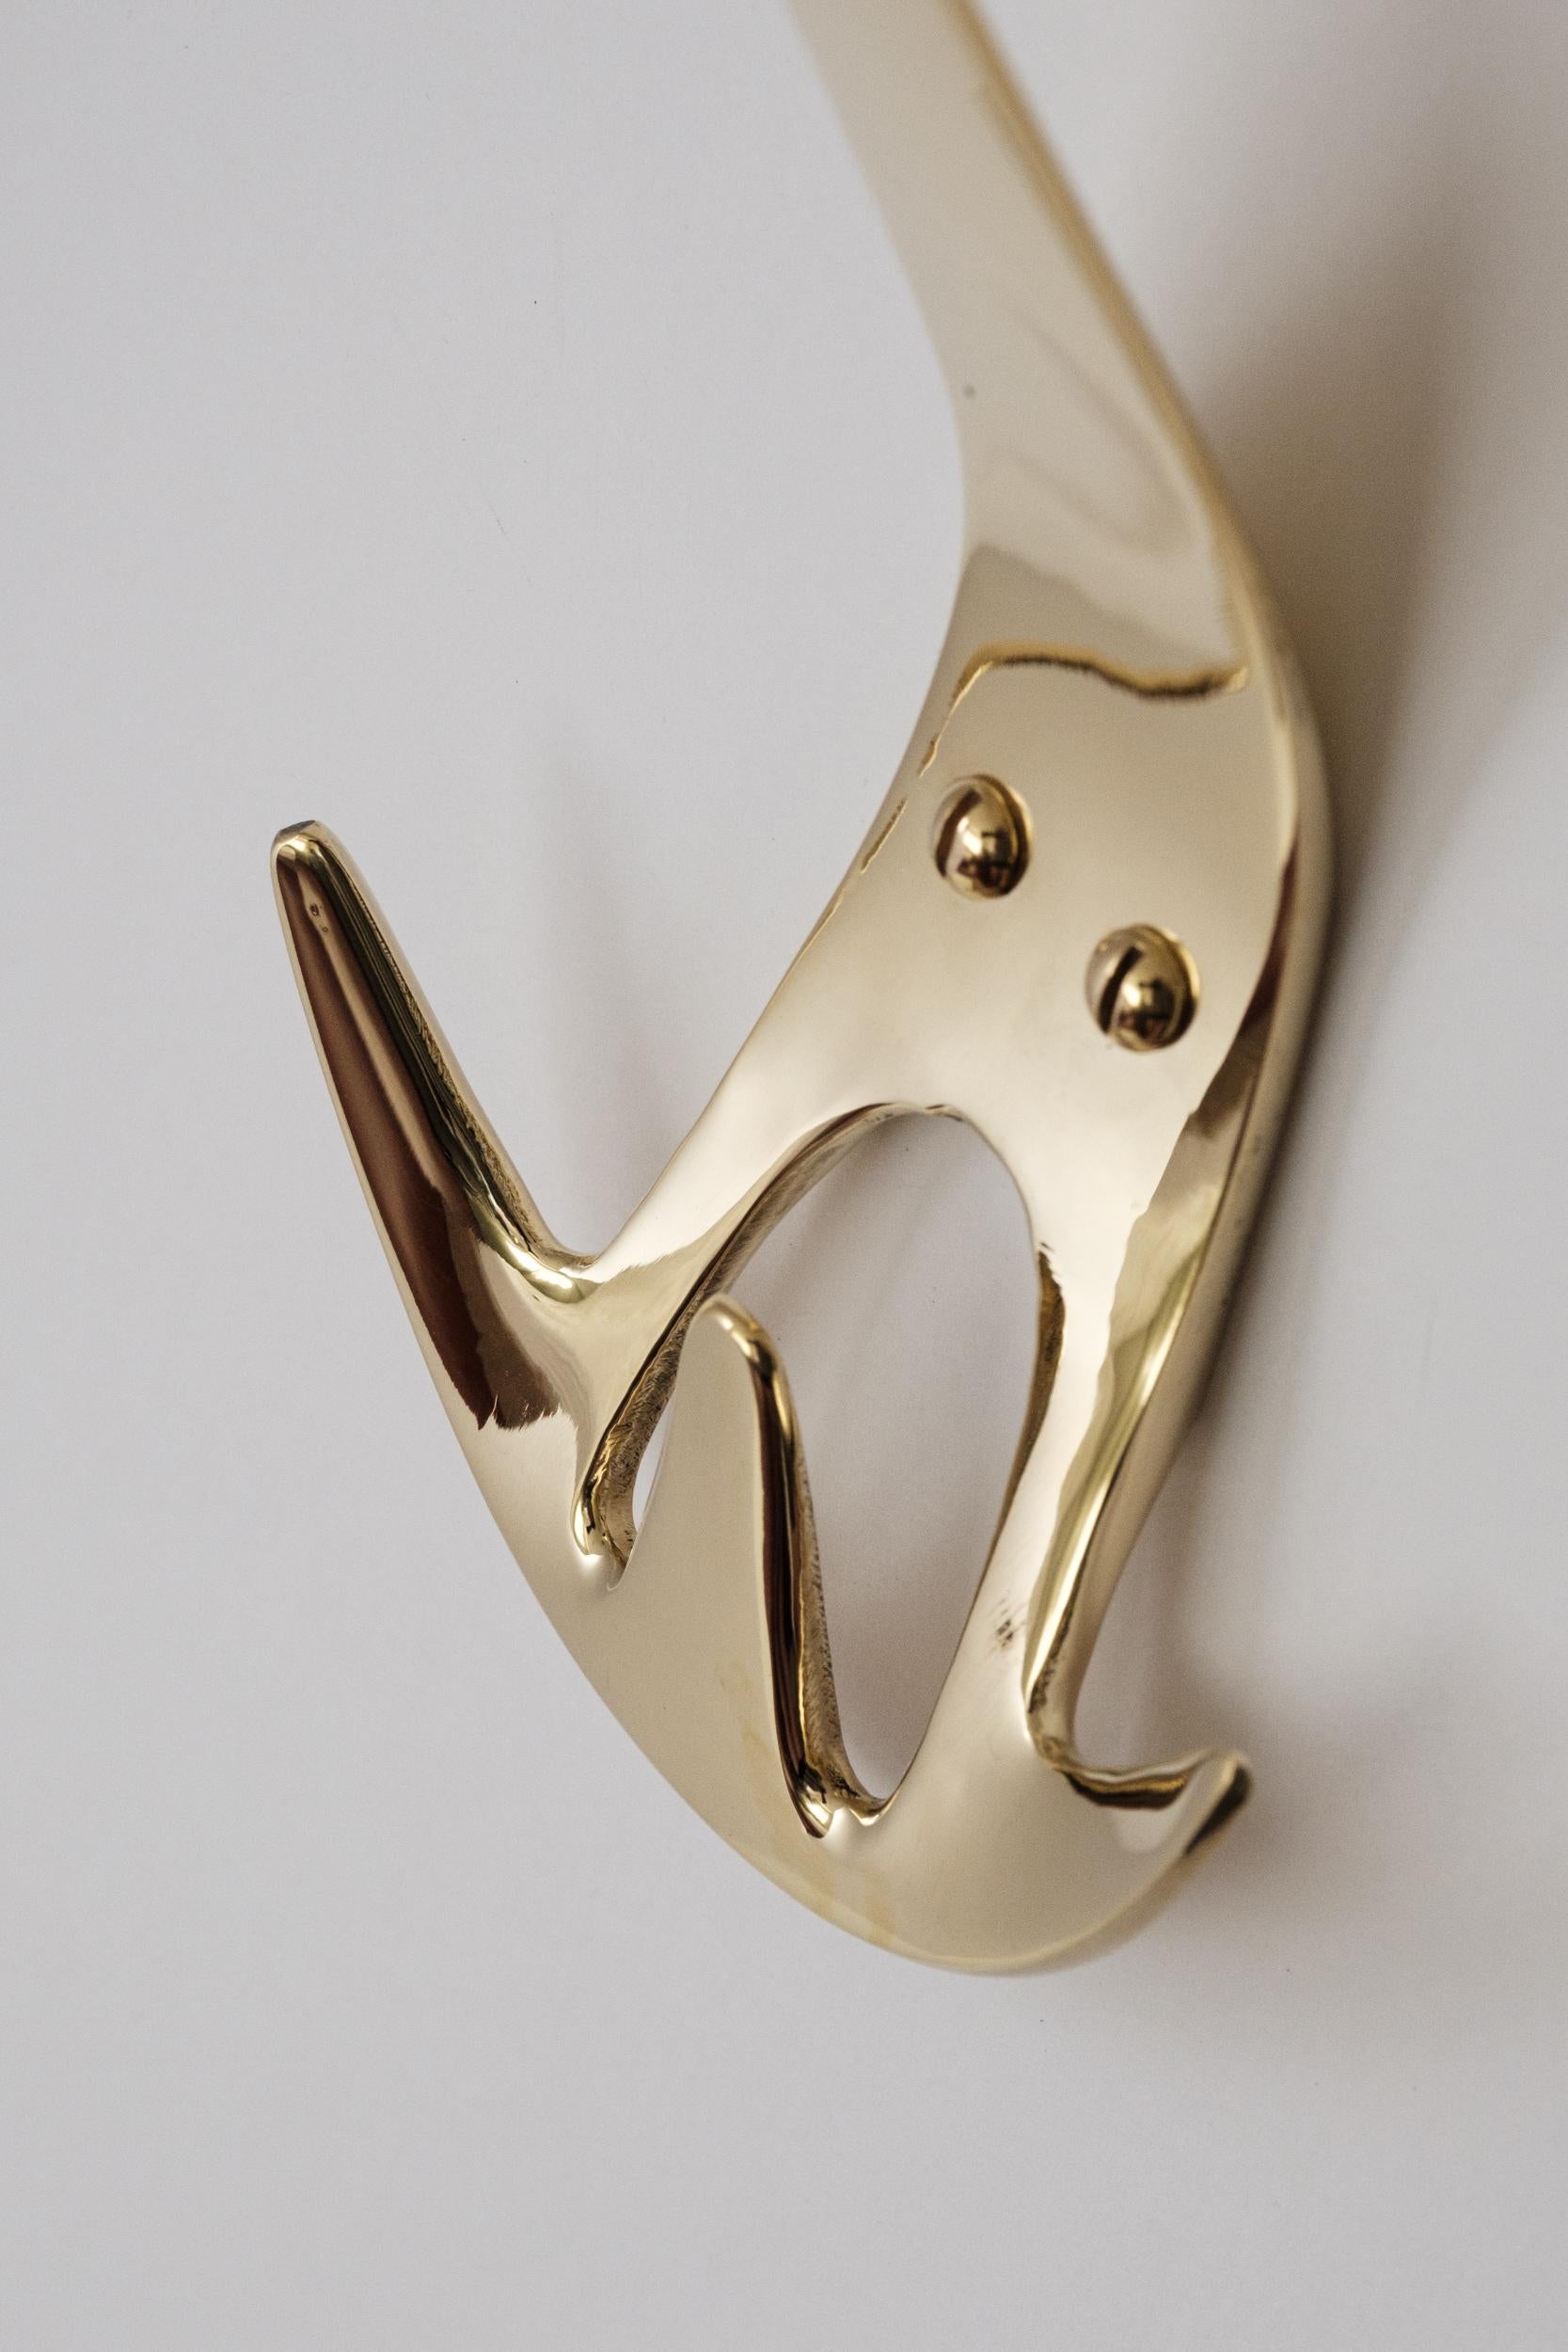 Carl Auböck Model #4903 polished brass hook. Designed in the 1950s, this versatile and Minimalist Viennese hook is executed in polished brass by Werkstätte Carl Auböck, Austria. 

Produced by Carl Auböck IV in the original Auböck workshop in the 7th